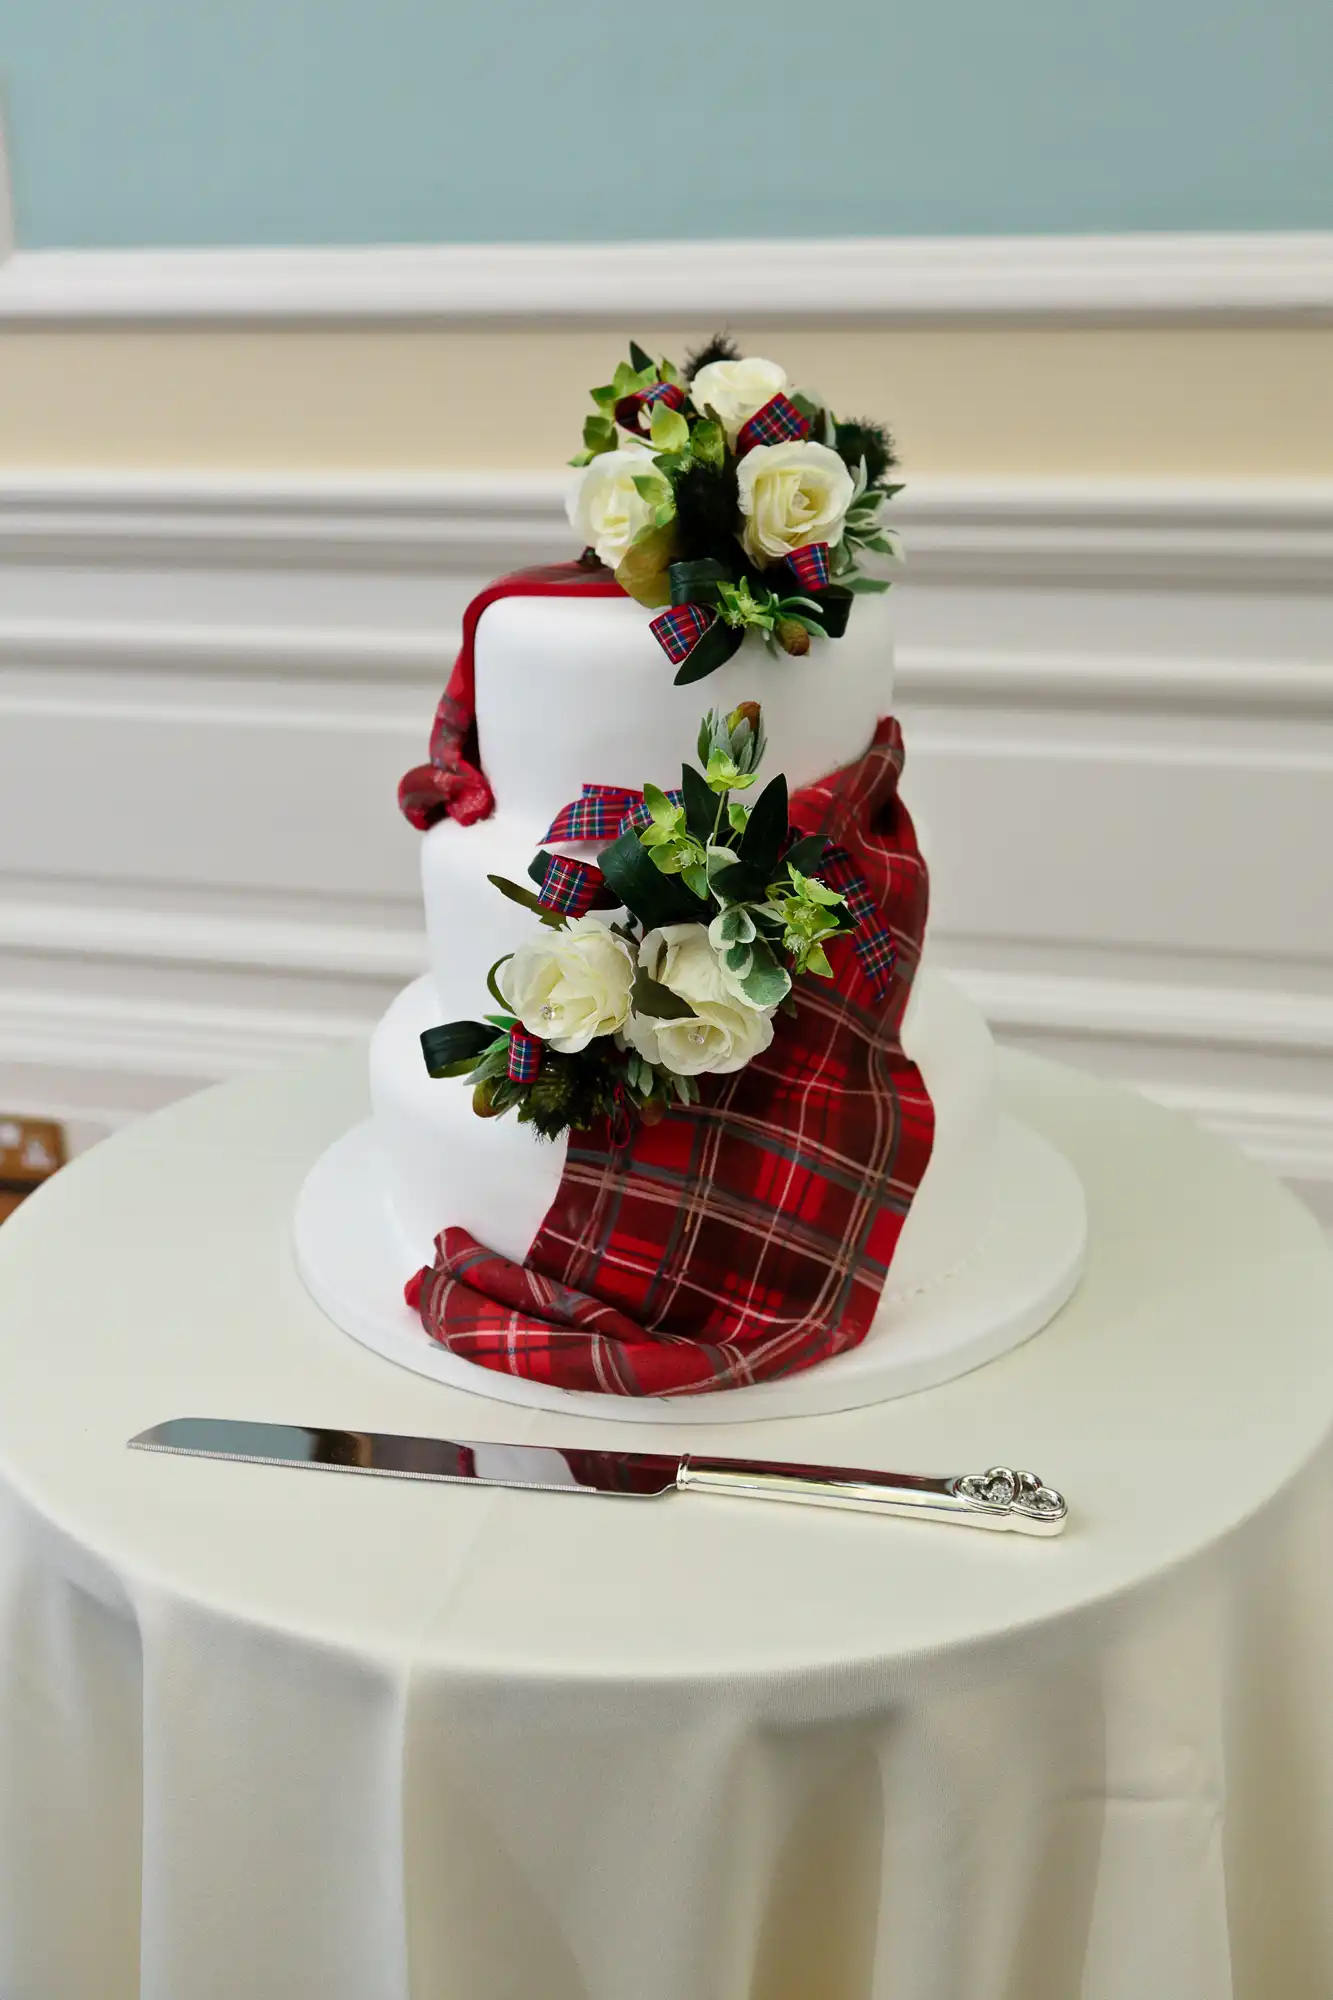 A three-tier wedding cake adorned with white icing, red tartan ribbons, and a floral arrangement, on a table beside a cake knife.